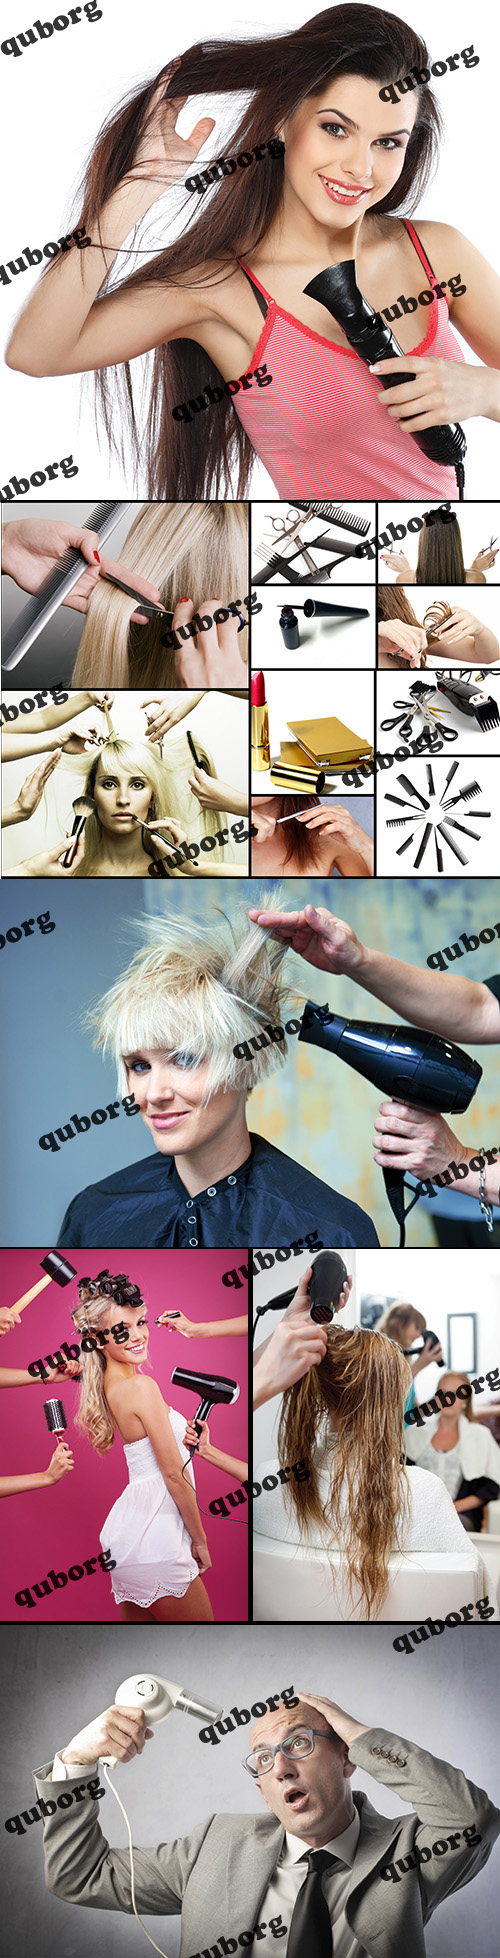 Stock Photos - Hairdresser People with a Hairdryer